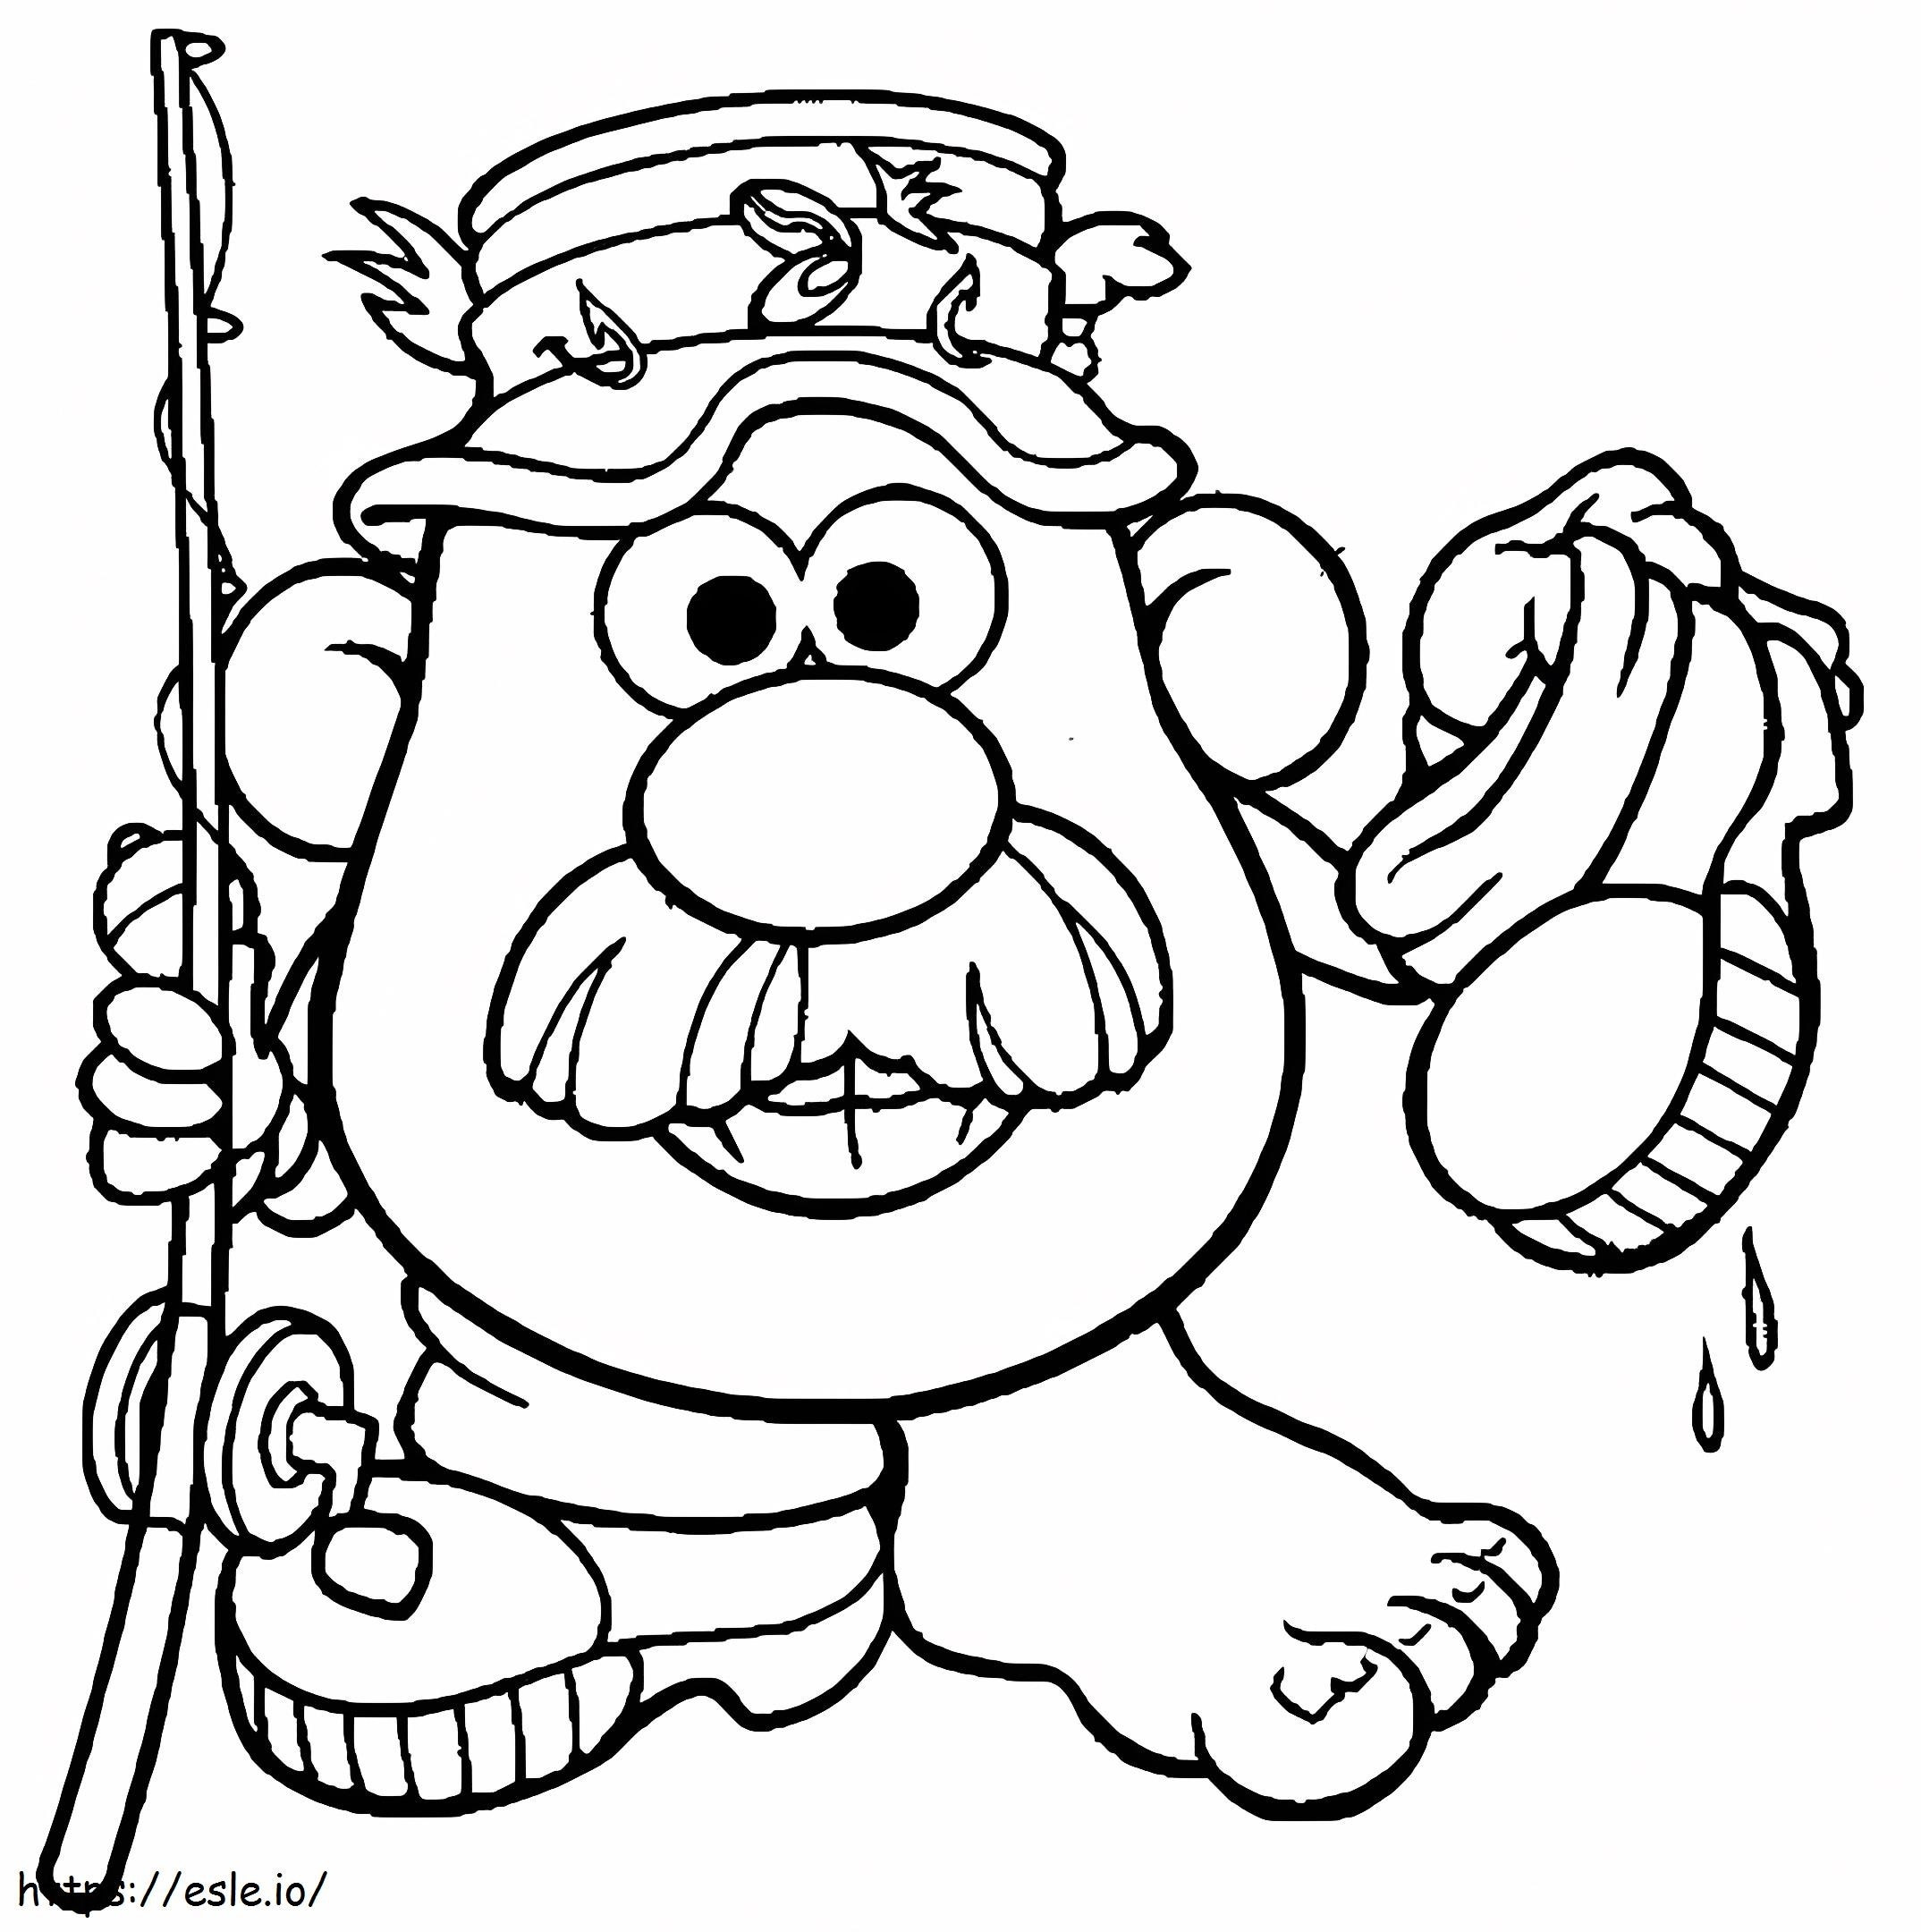 Mr Potato Head Holding Shoes And Fishing Rod coloring page